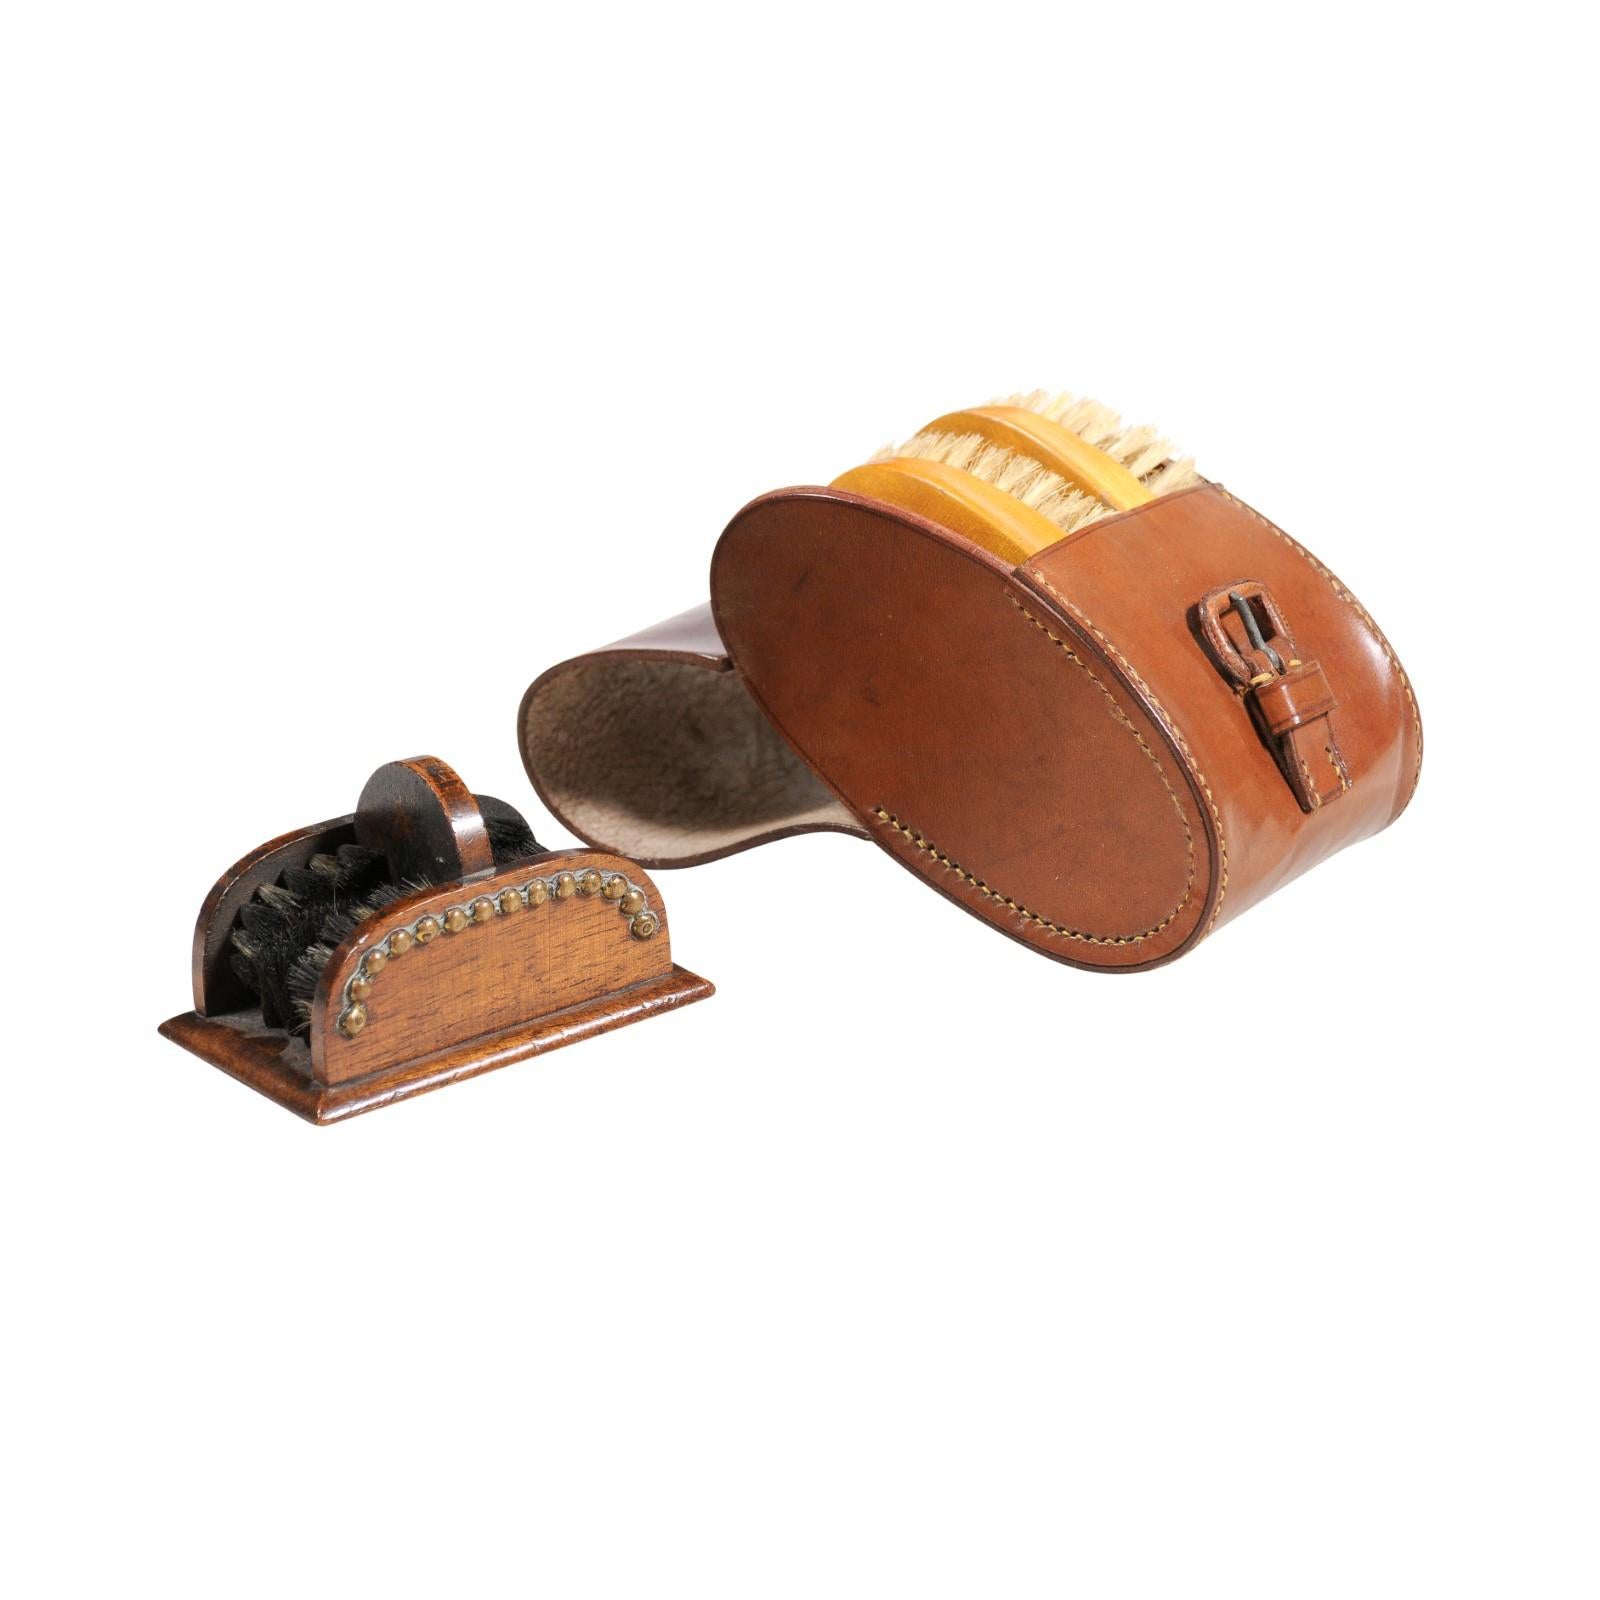 An antique English Victorian period shoe care set from the 19th century, with four brushes and original leather case. Created in England during the reign of Queen Victoria, this shoe care set features an oval leather case measuring 5.25